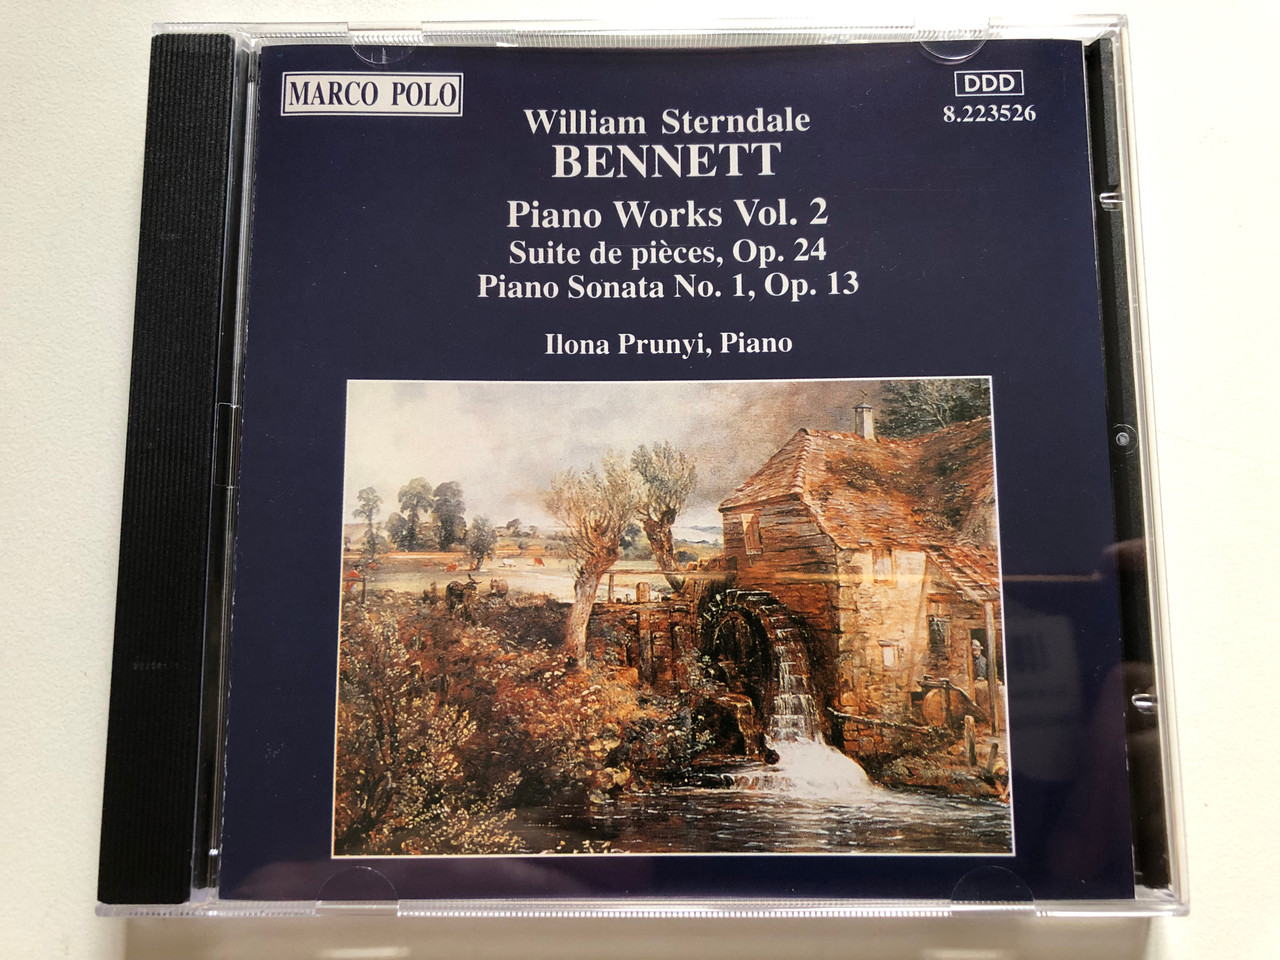 https://cdn10.bigcommerce.com/s-62bdpkt7pb/products/0/images/307015/William_Sterndale_Bennett_-_Piano_Works_Vol._2_Suite_De_Pices_Op._24_Piano_Sonata_No._1_Op._13_-_Ilona_Prunyi_piano_Marco_Polo_Audio_CD_1993_Stereo_8_1__63055.1698439083.1280.1280.JPG?c=2